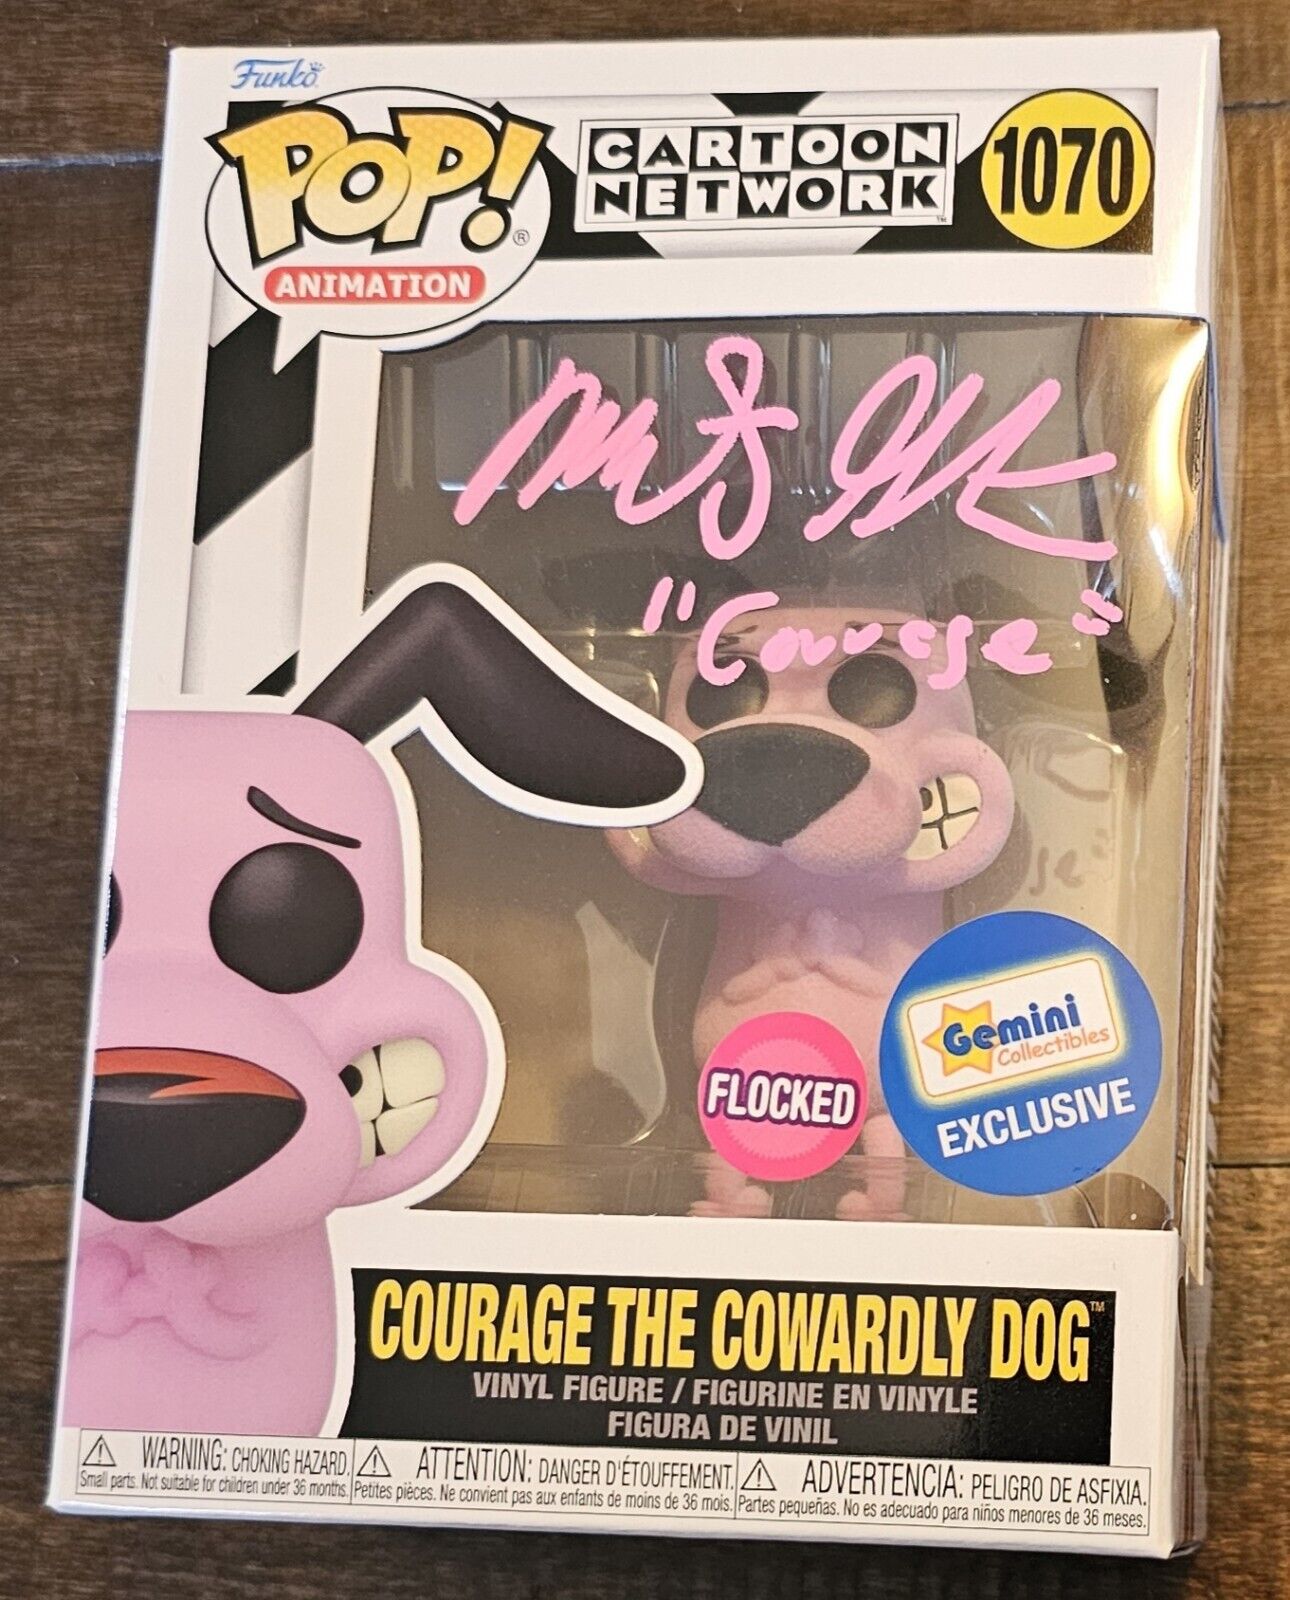 Marty Gradstein signed Courage the Cowardly Dog Cartoon Network Funko Pop #1070